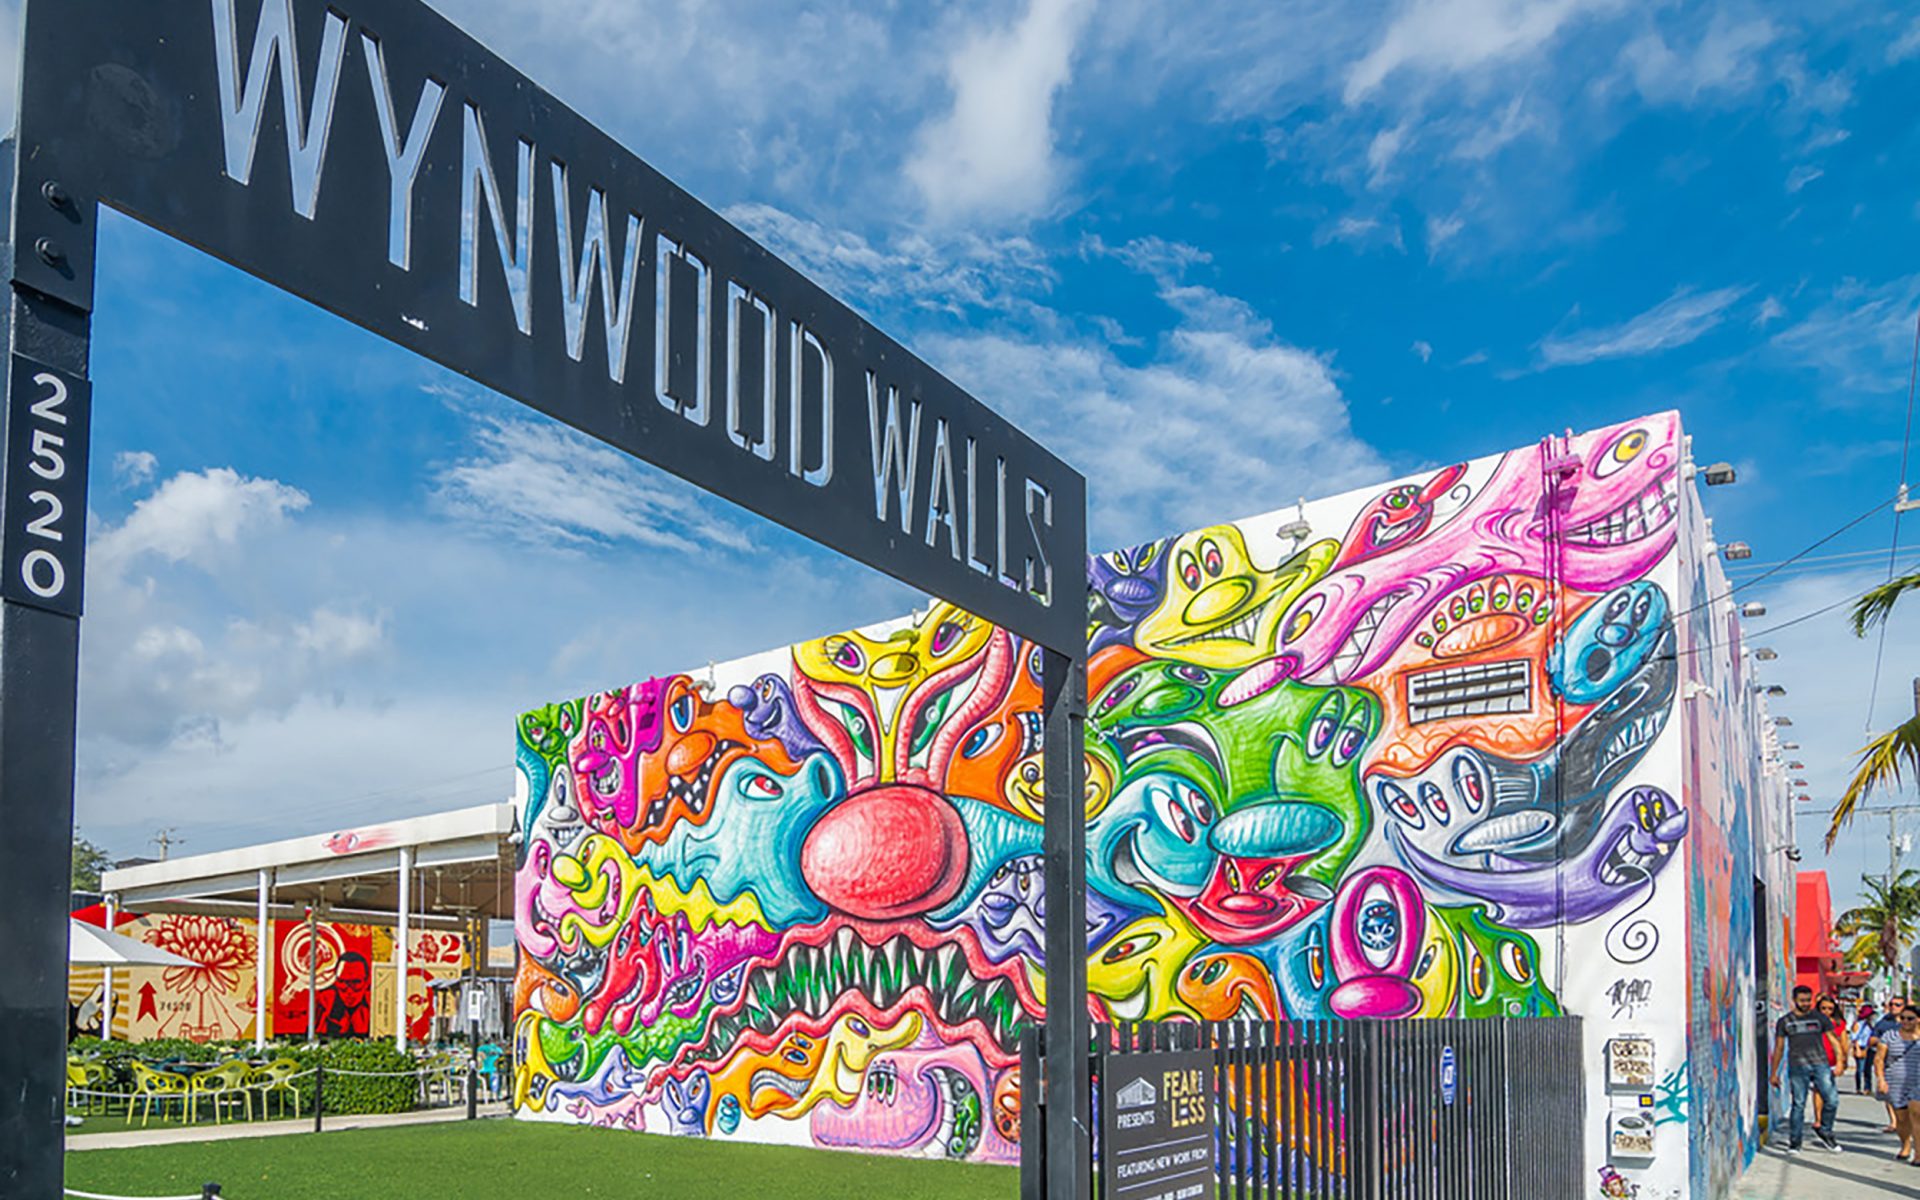 Discover the Global Street Art Taking Center Stage at Miami's Wynwood